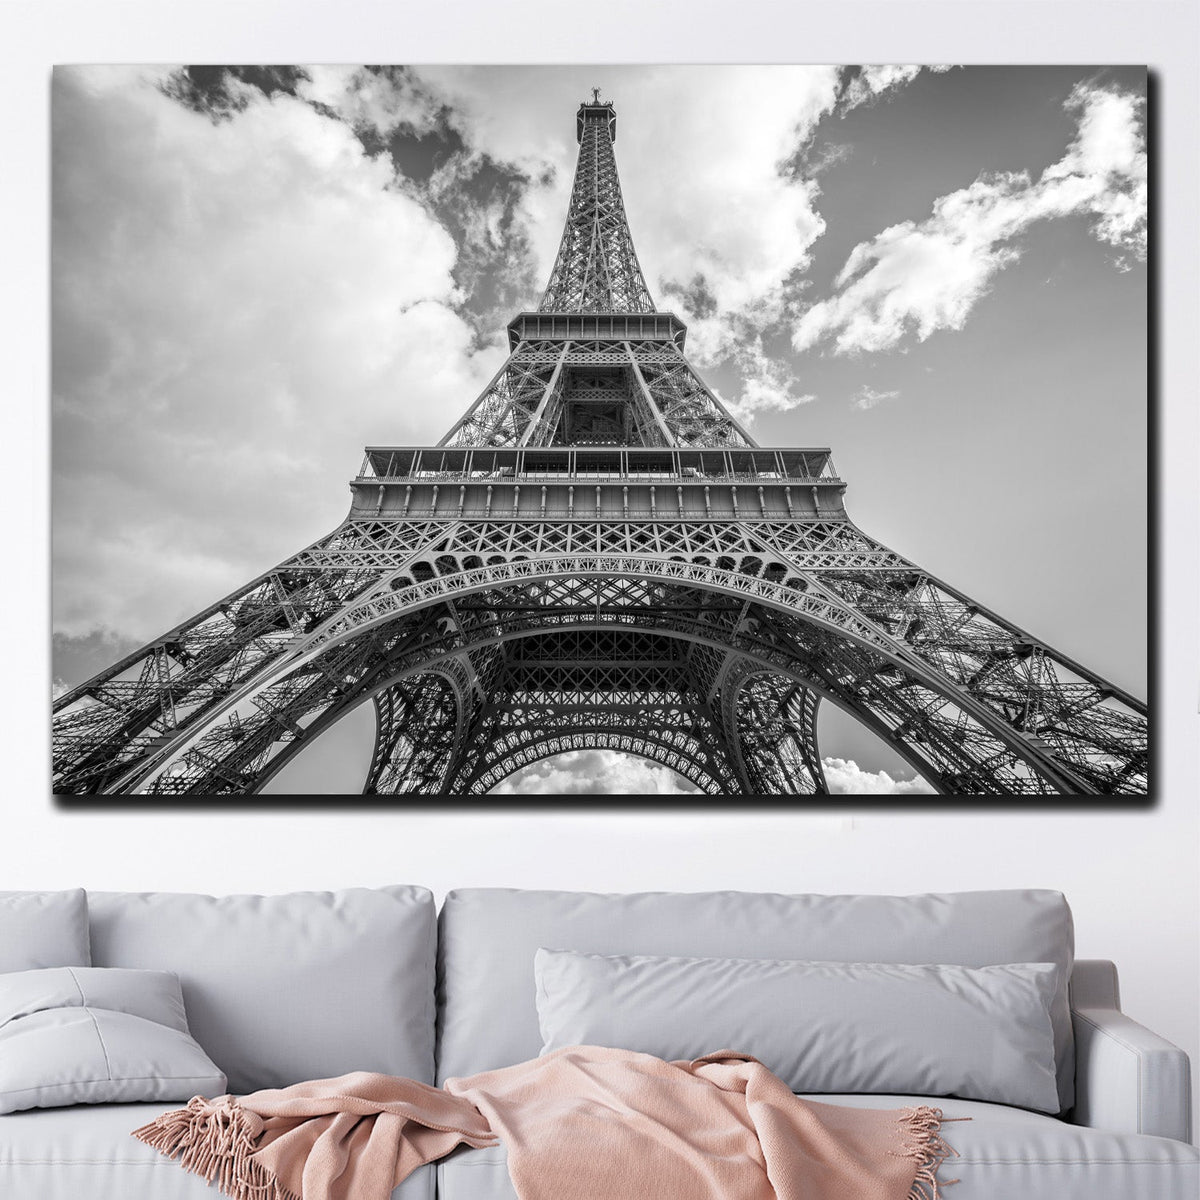 https://cdn.shopify.com/s/files/1/0387/9986/8044/products/TheIconicEiffelTowerCanvasArtprintStretched-3.jpg